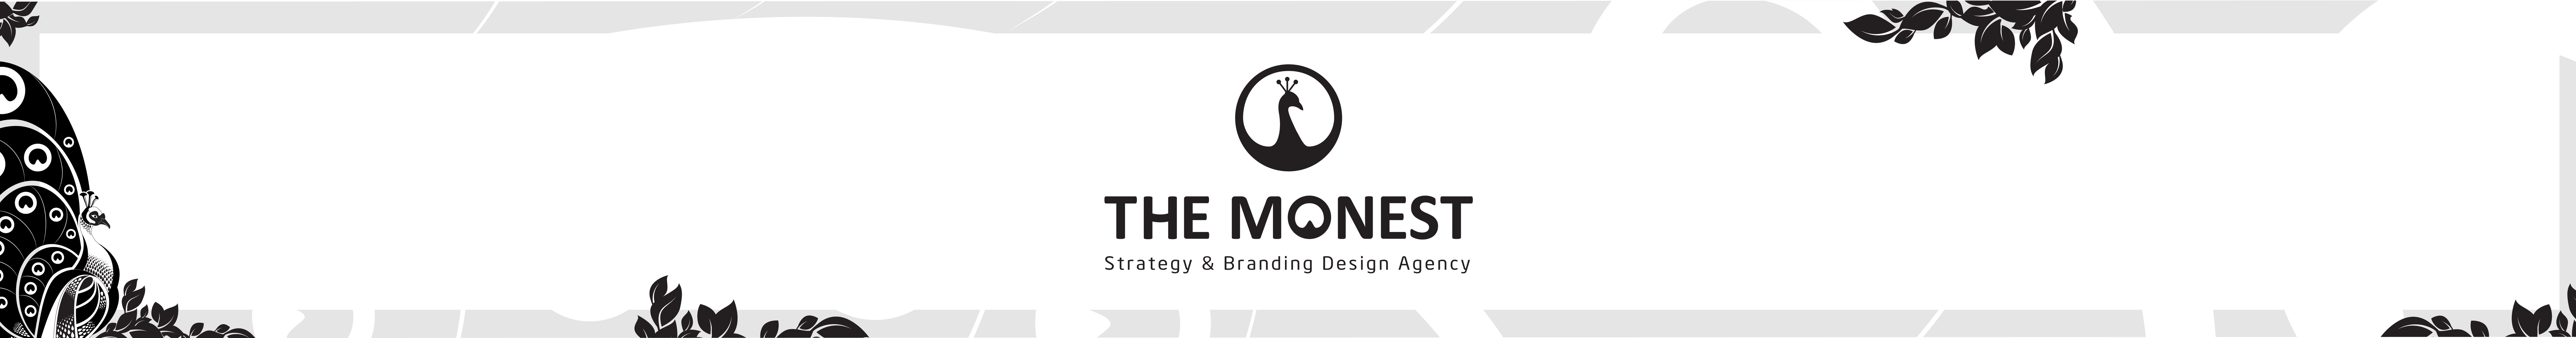 THE MONEST Agency's profile banner